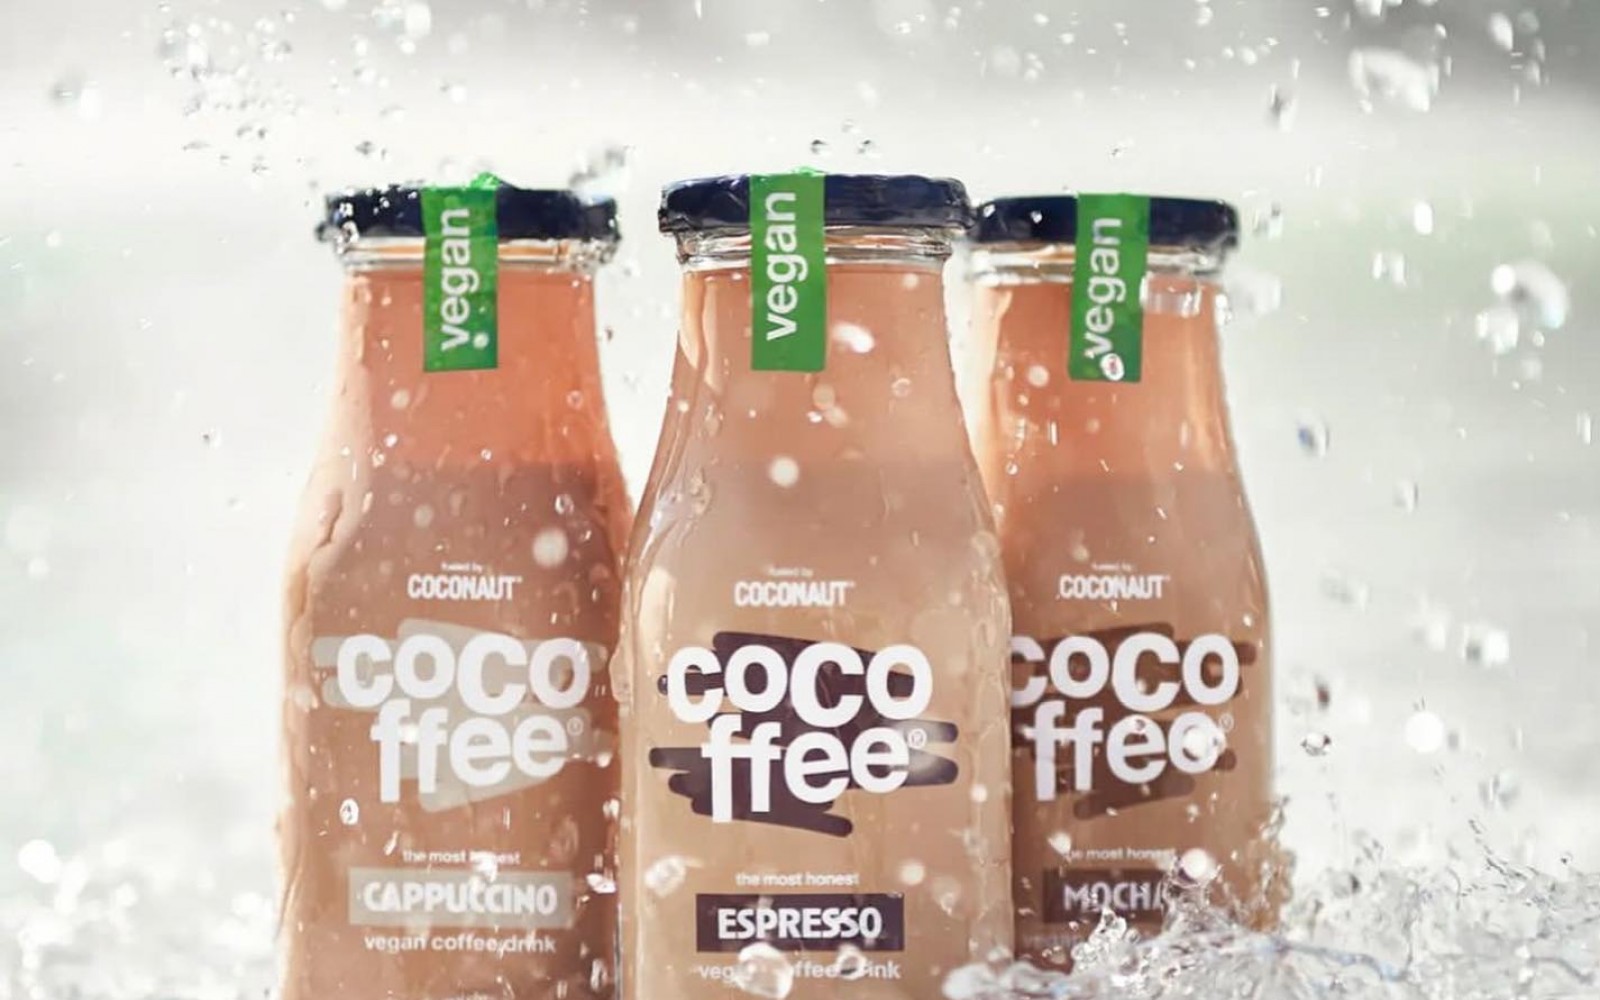 Try our gluten-free, vegan, coconut water-based coffees!